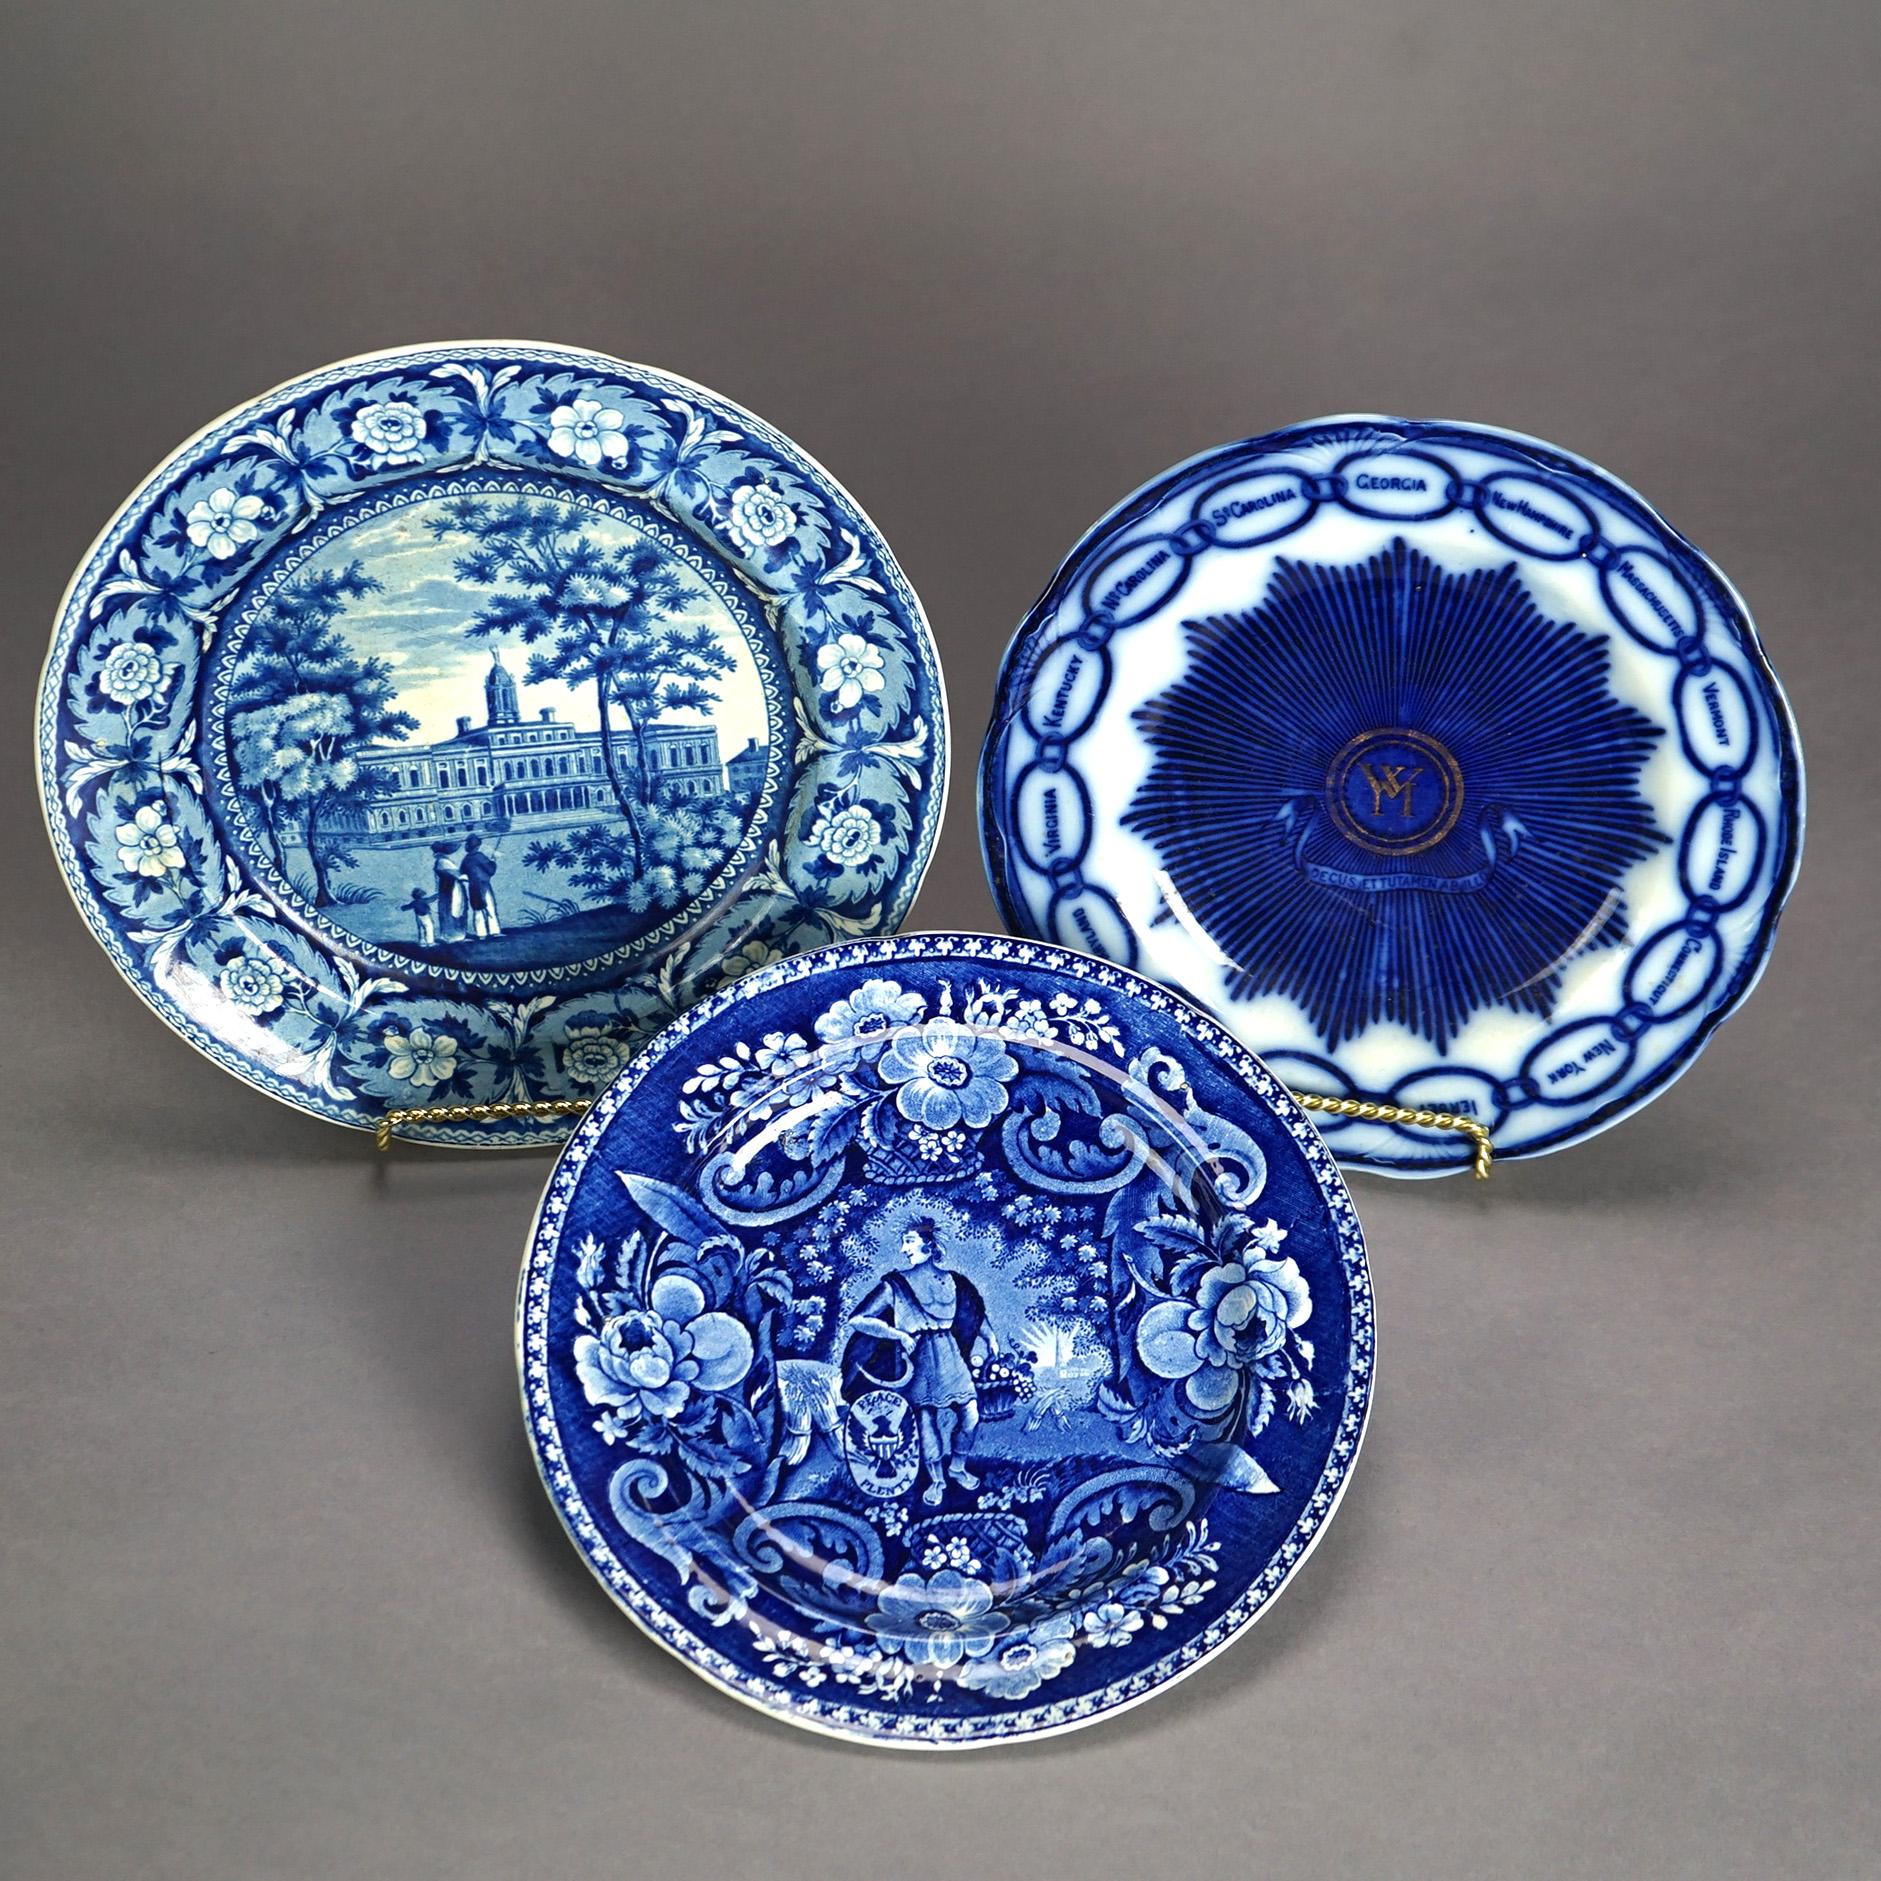 Three Antique Historical Flow Blue Pottery Plates, Clews & Ridgway, 19th C

Measure - 10